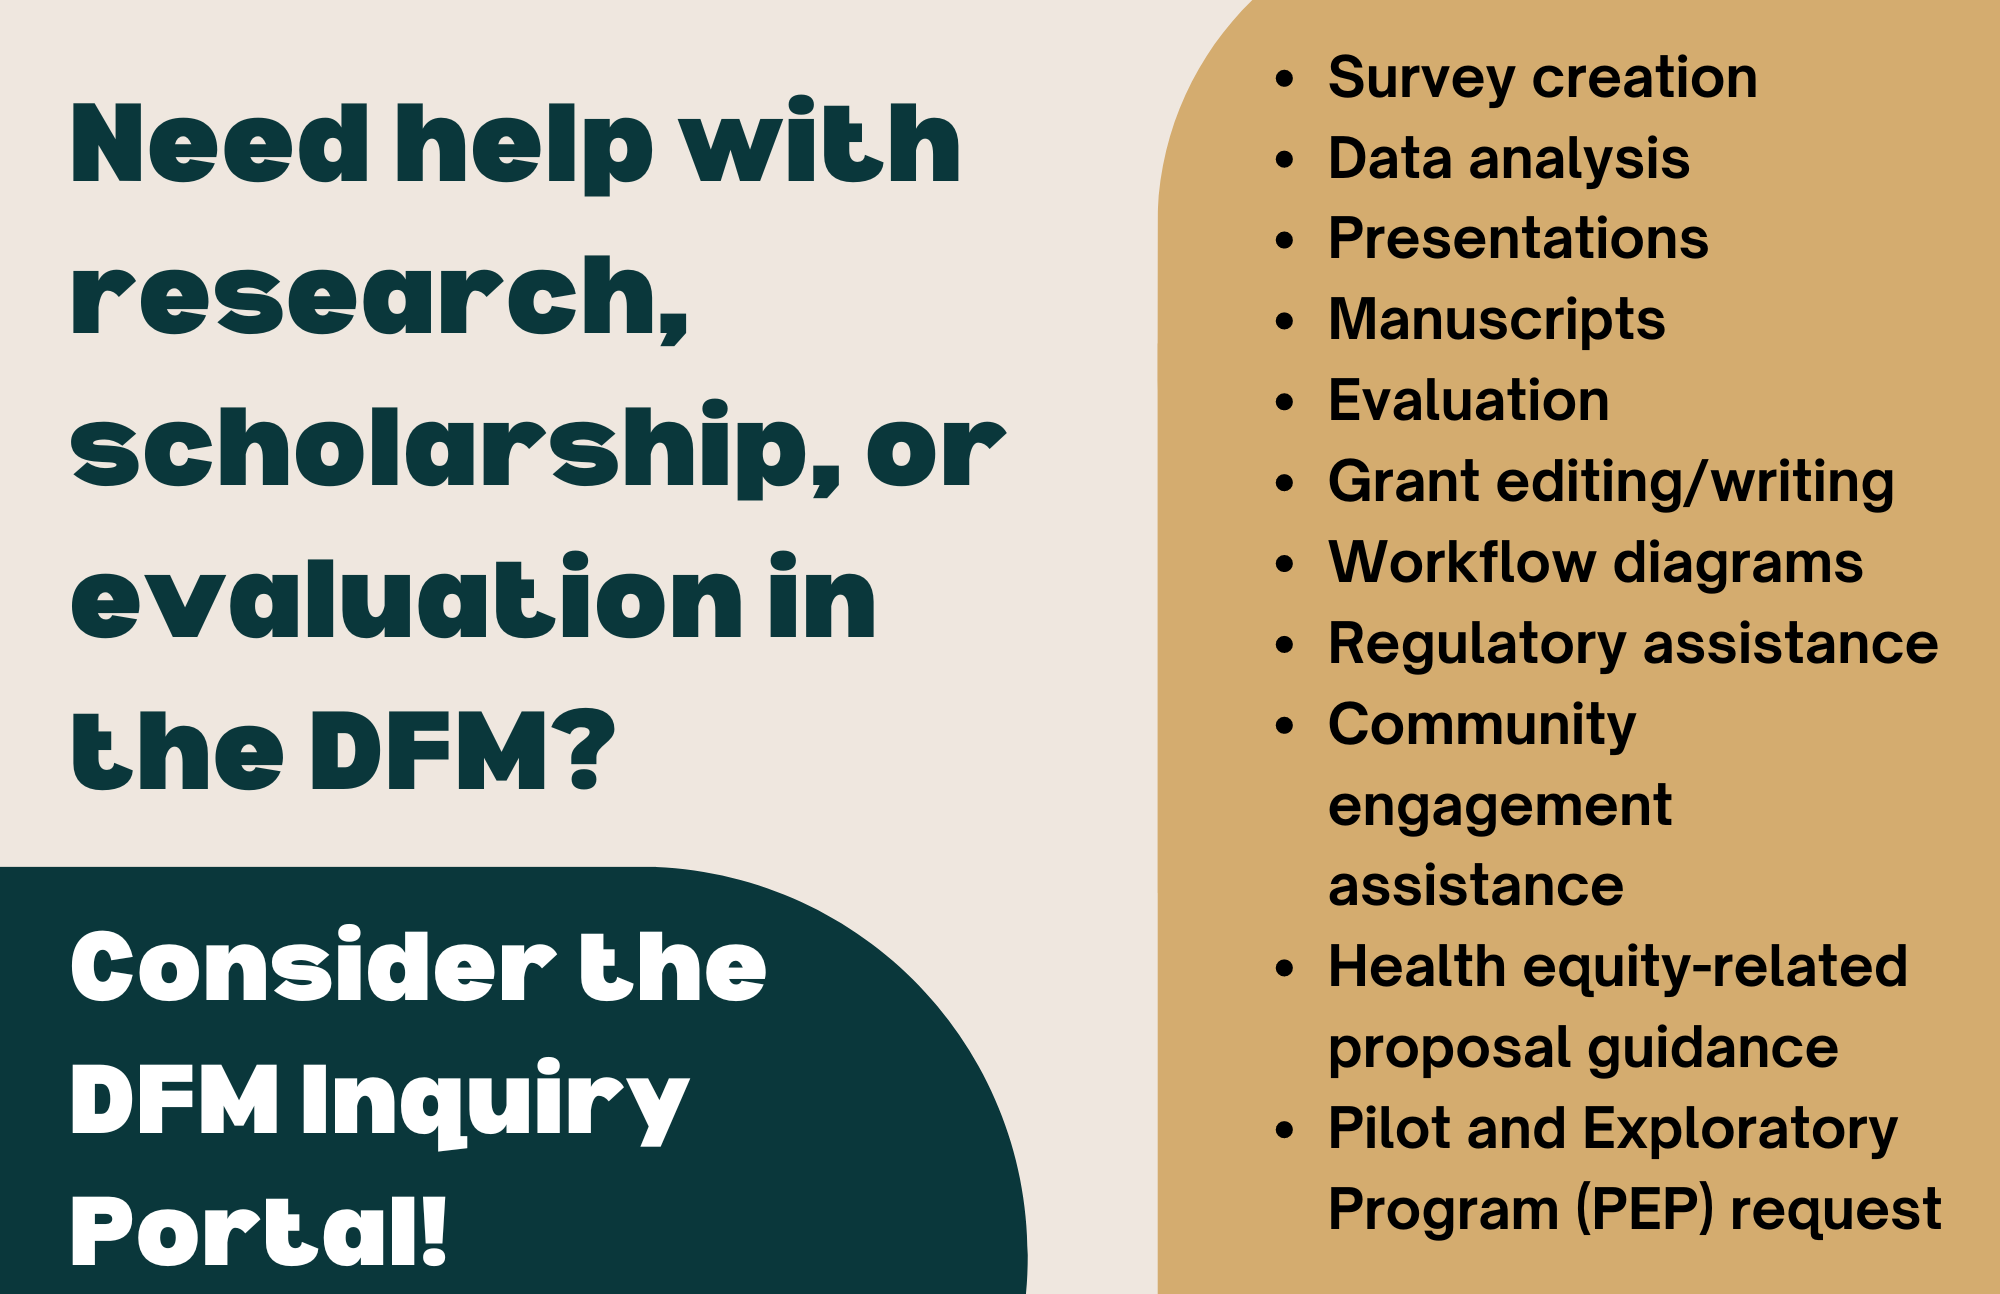 Need help with research, scholarship, or evaluation in the DFM? Consider the DFM Inquiry Portal!